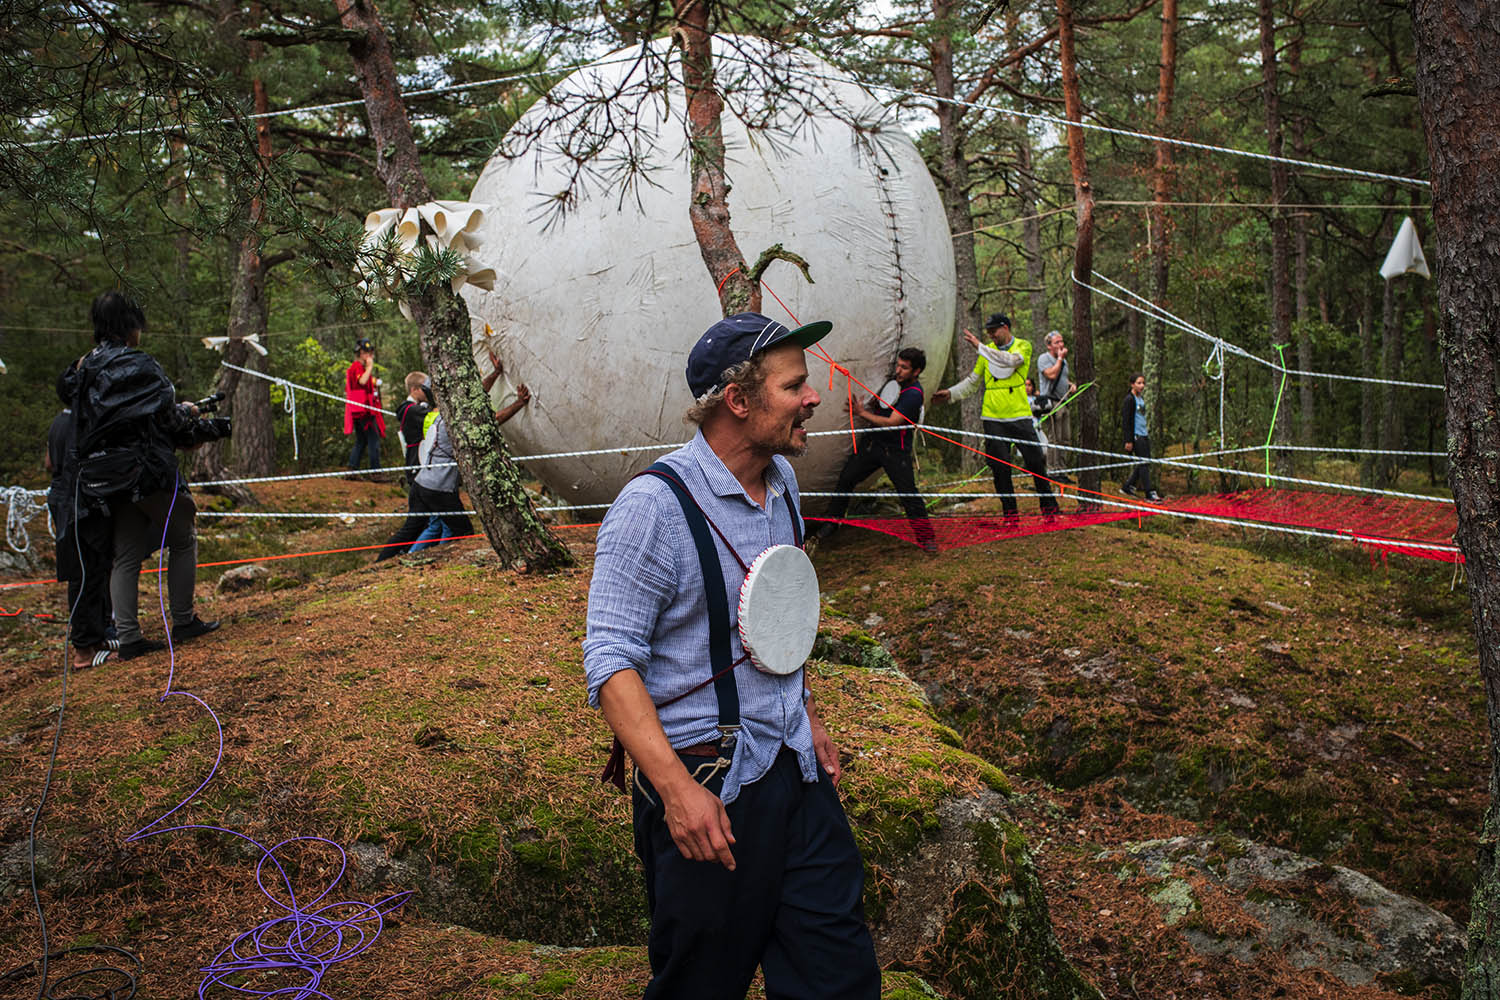 People rolling a giant ball in the forrest.